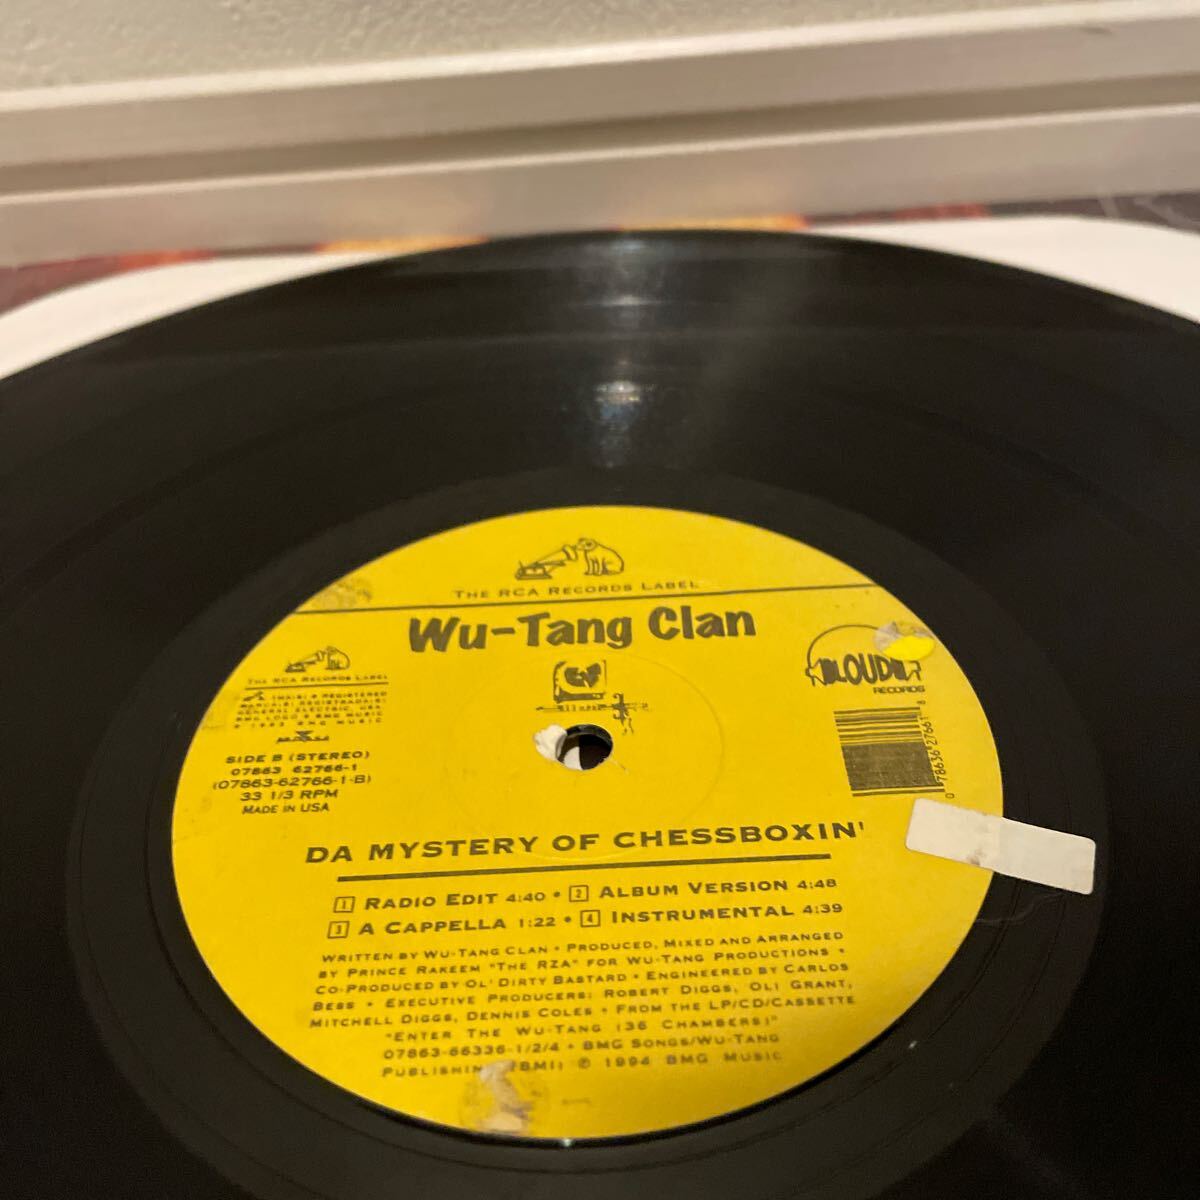 Wu-Tang Clan C.R.E.A.M. (Cash Rules Everything Around Me) 1枚目 シール跡と傷がおおいです。の画像4